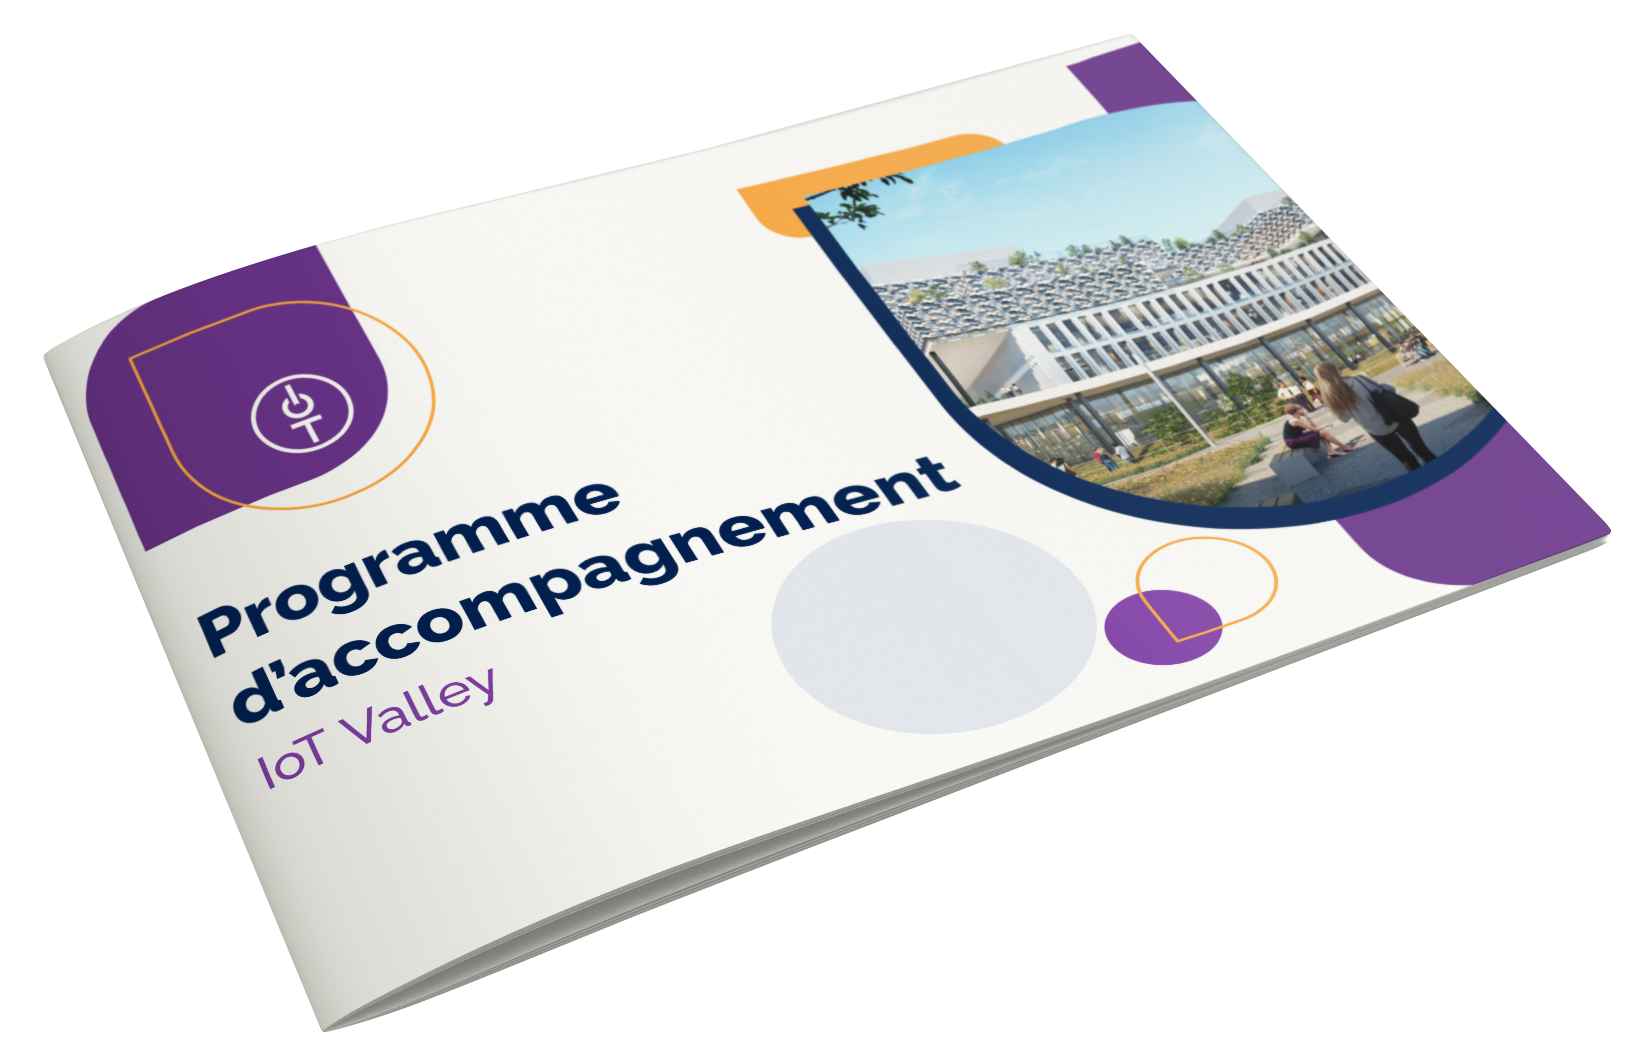 Programme daccompagnement